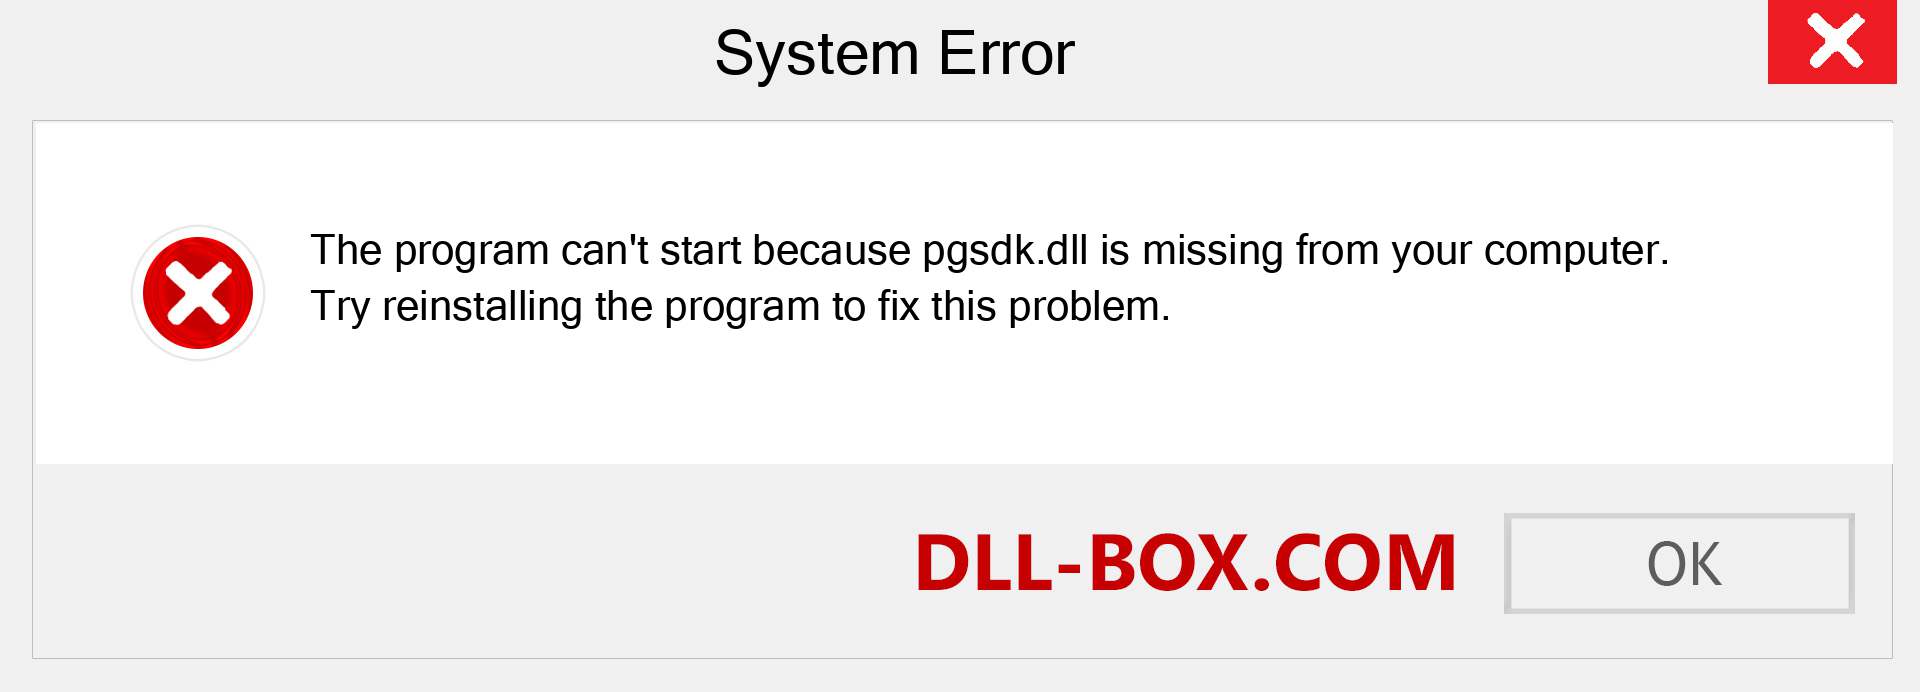  pgsdk.dll file is missing?. Download for Windows 7, 8, 10 - Fix  pgsdk dll Missing Error on Windows, photos, images